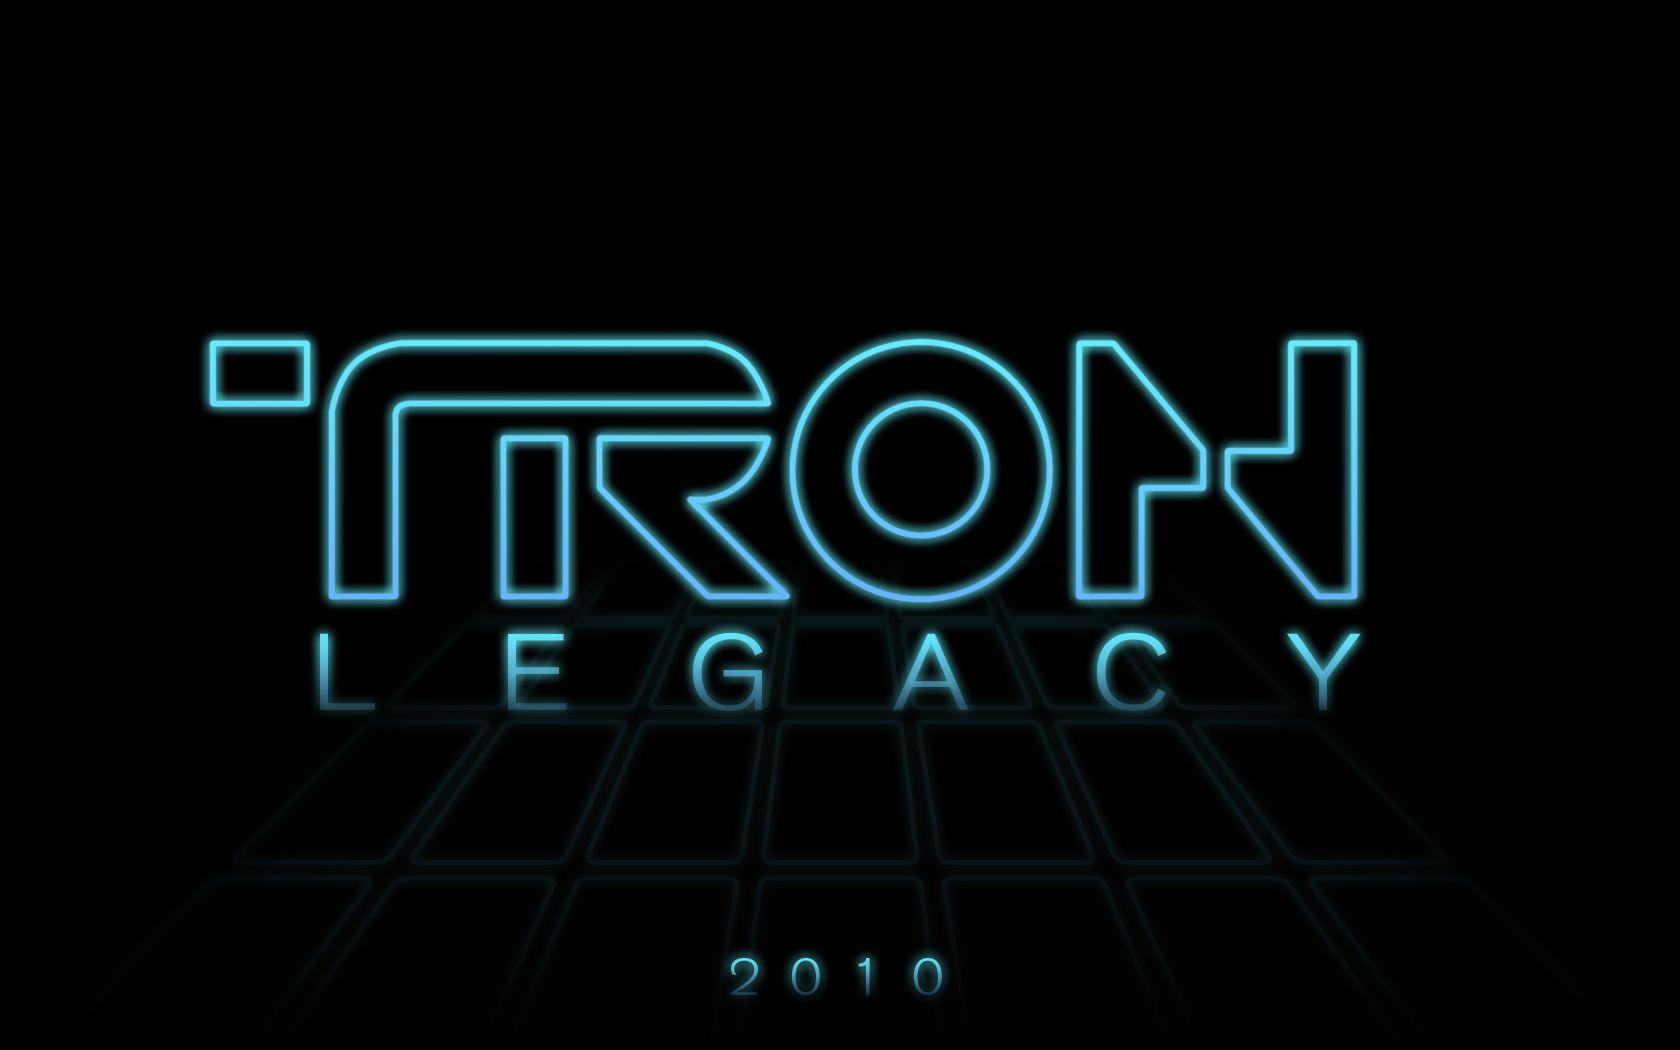 Tron Movie Logo - Tron Legacy Wallpapers (Megapack) « Awesome Wallpapers